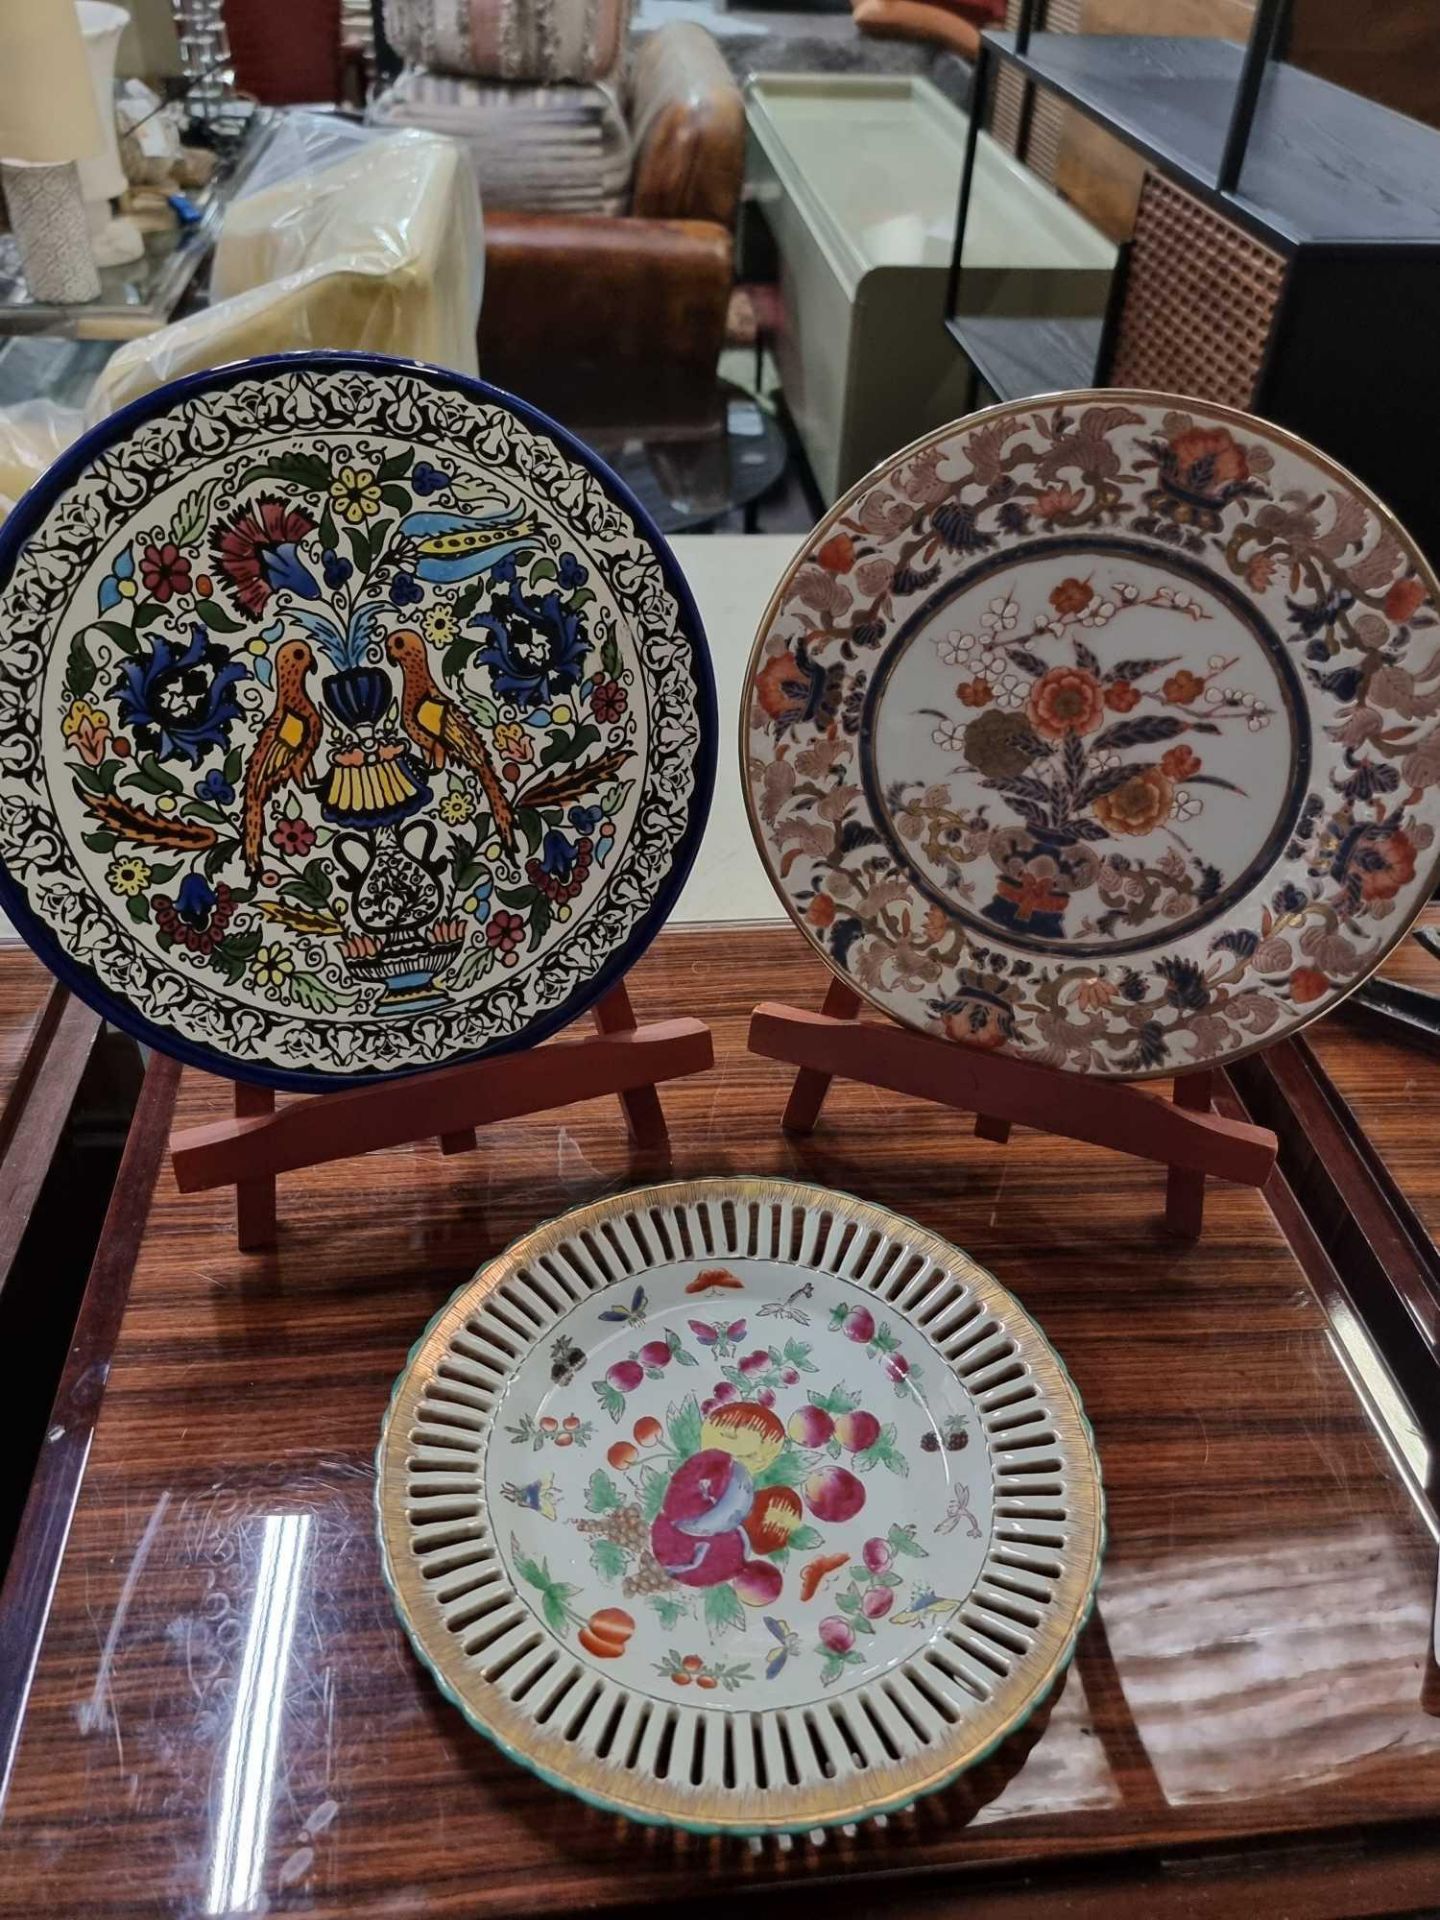 United Wilson JUWC 1897 Decorative Plates 26cm Complete With Two Others One Depicts Chinese